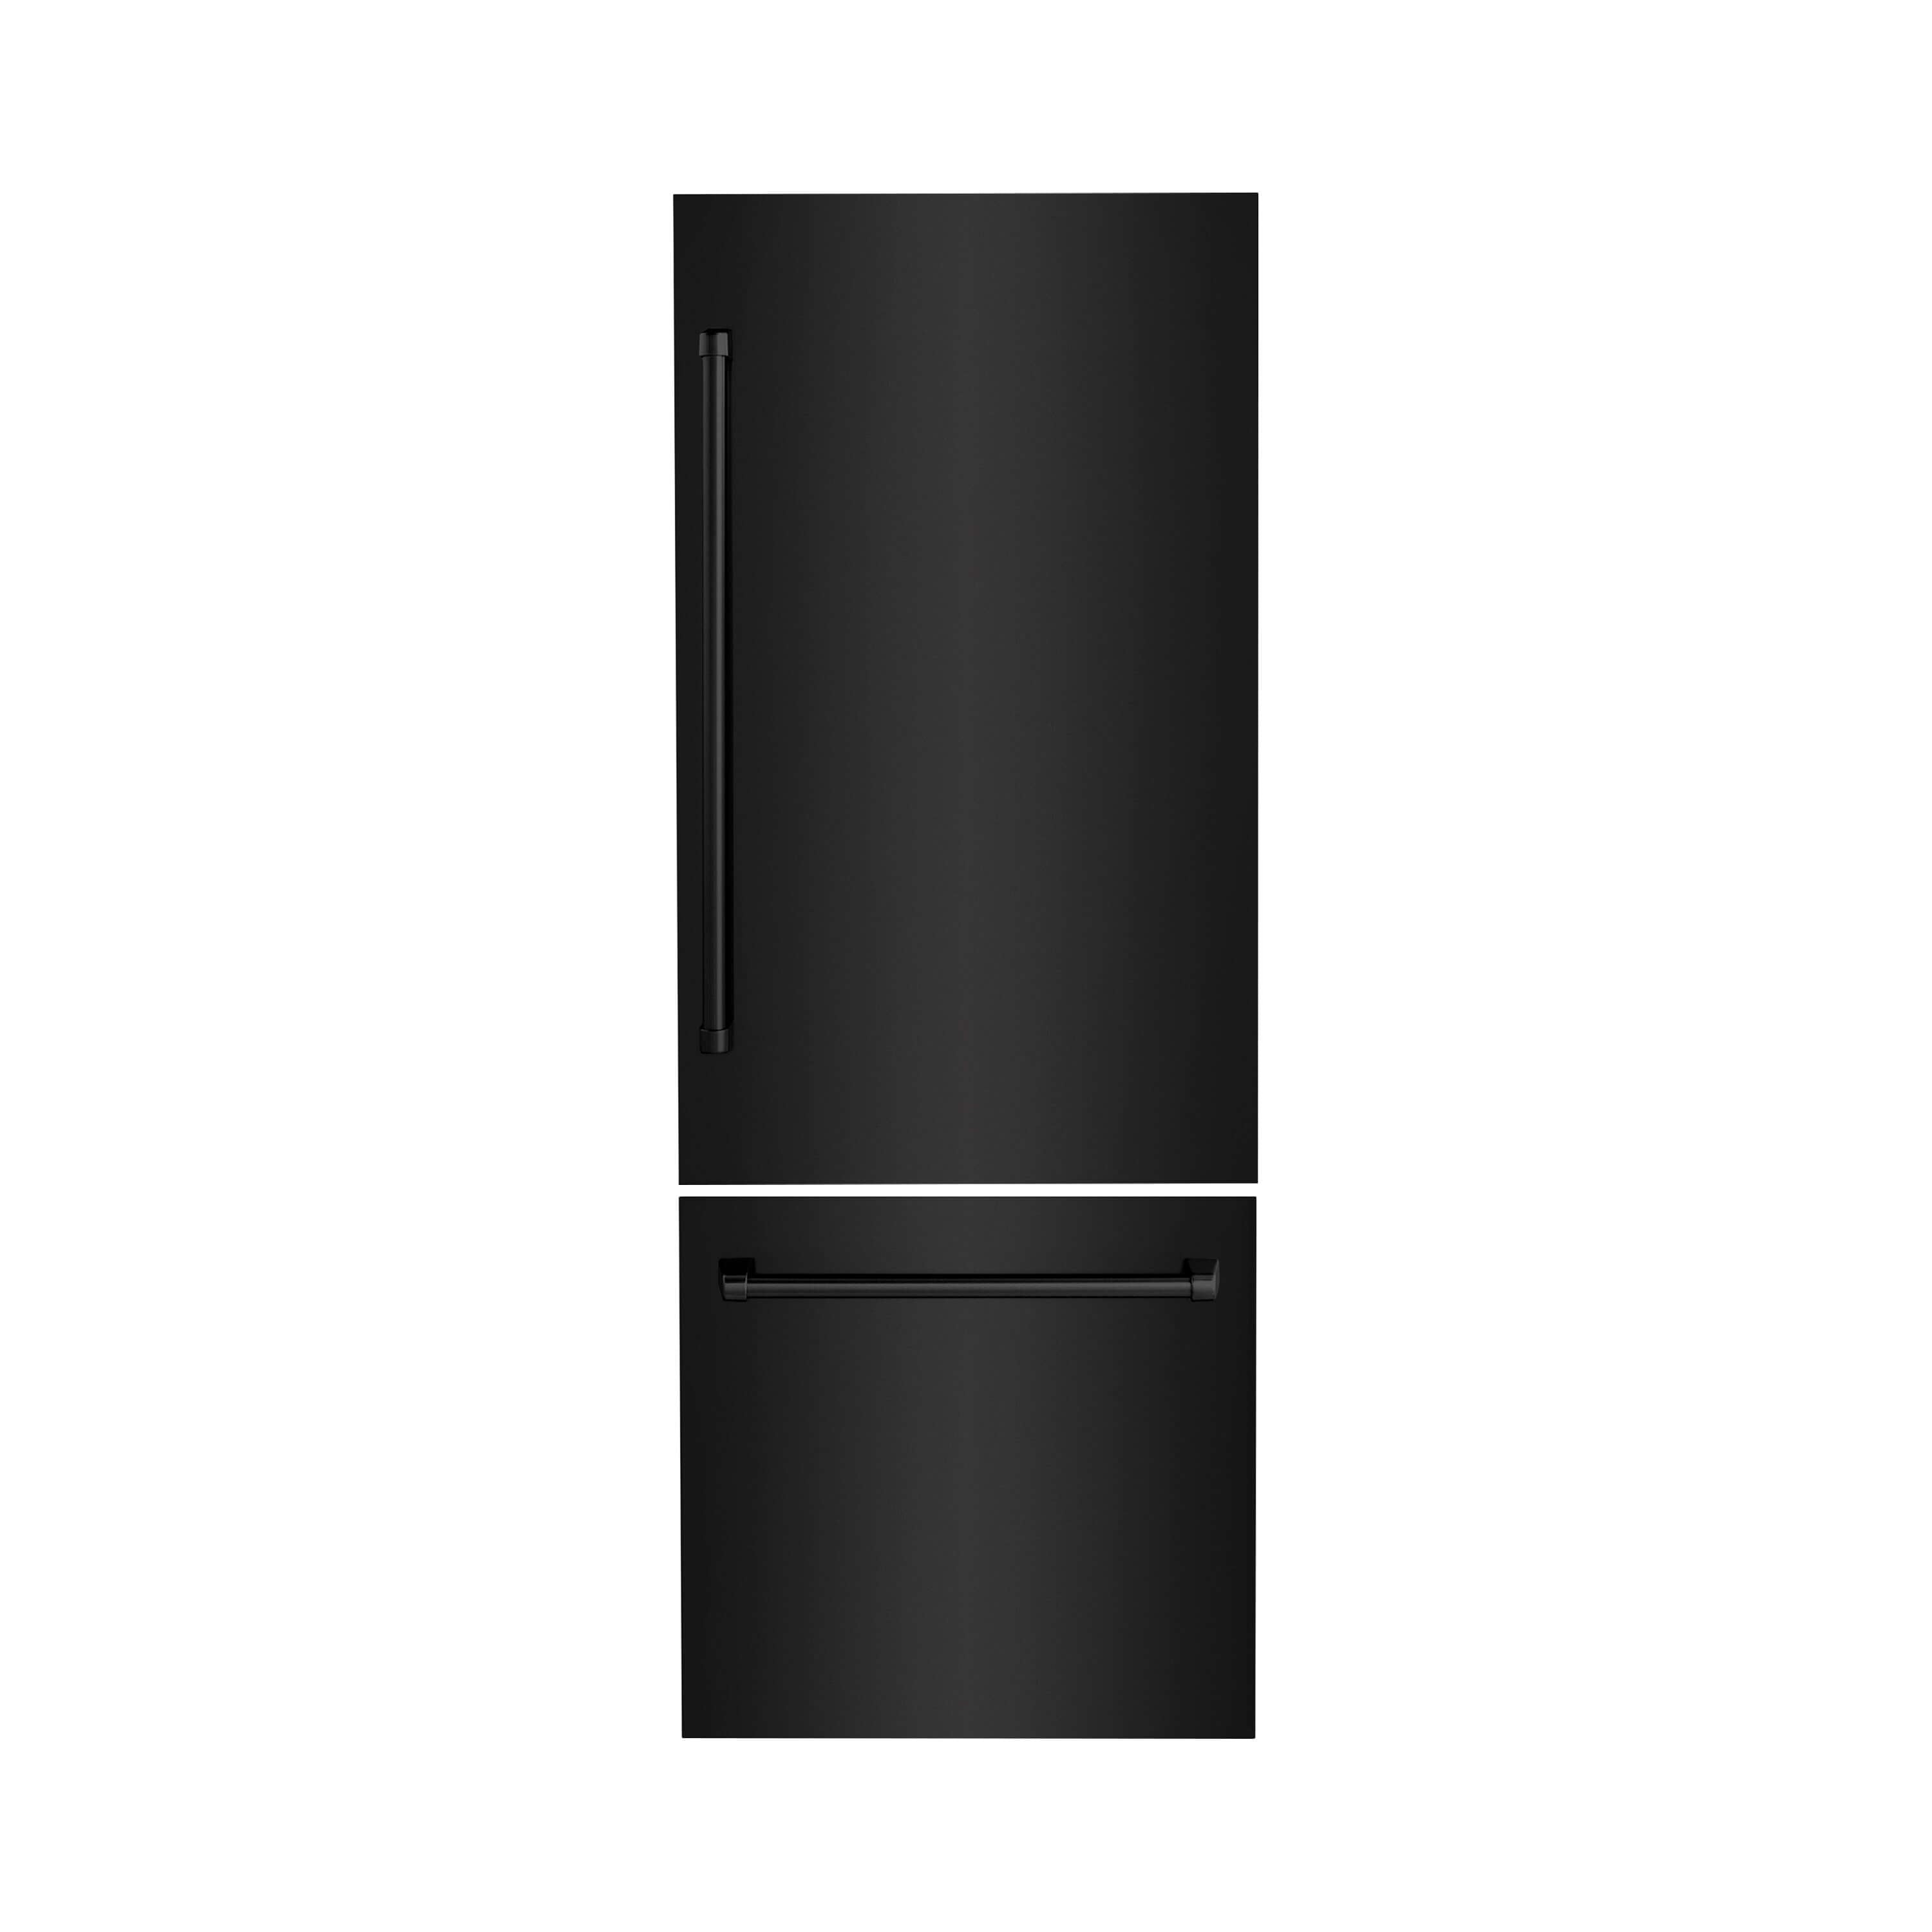 Panels & Handles Only- ZLINE 30 in. Refrigerator Panels in Black Stainless Steel for a 30 in. Built-in Refrigerator (RPBIV-BS-30)